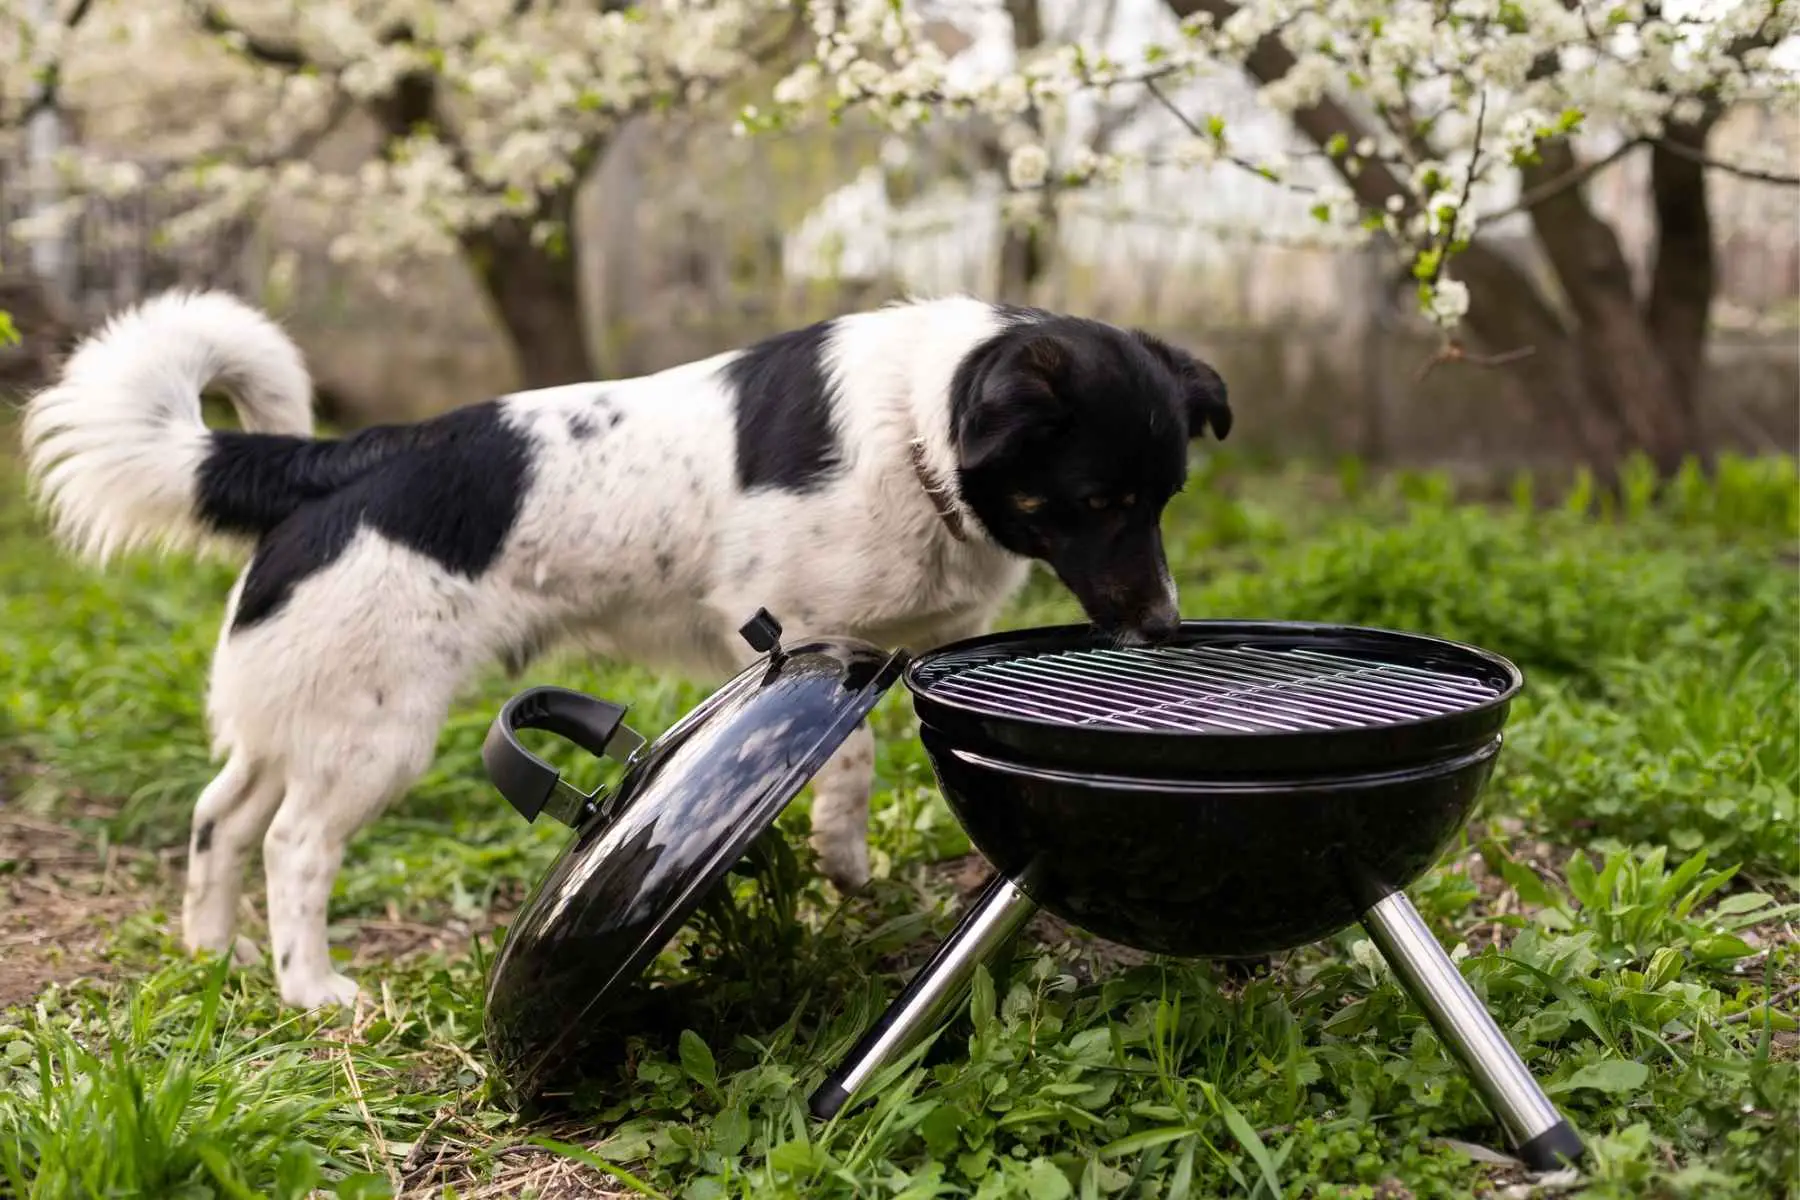 Dog closely watching a charcoal grill